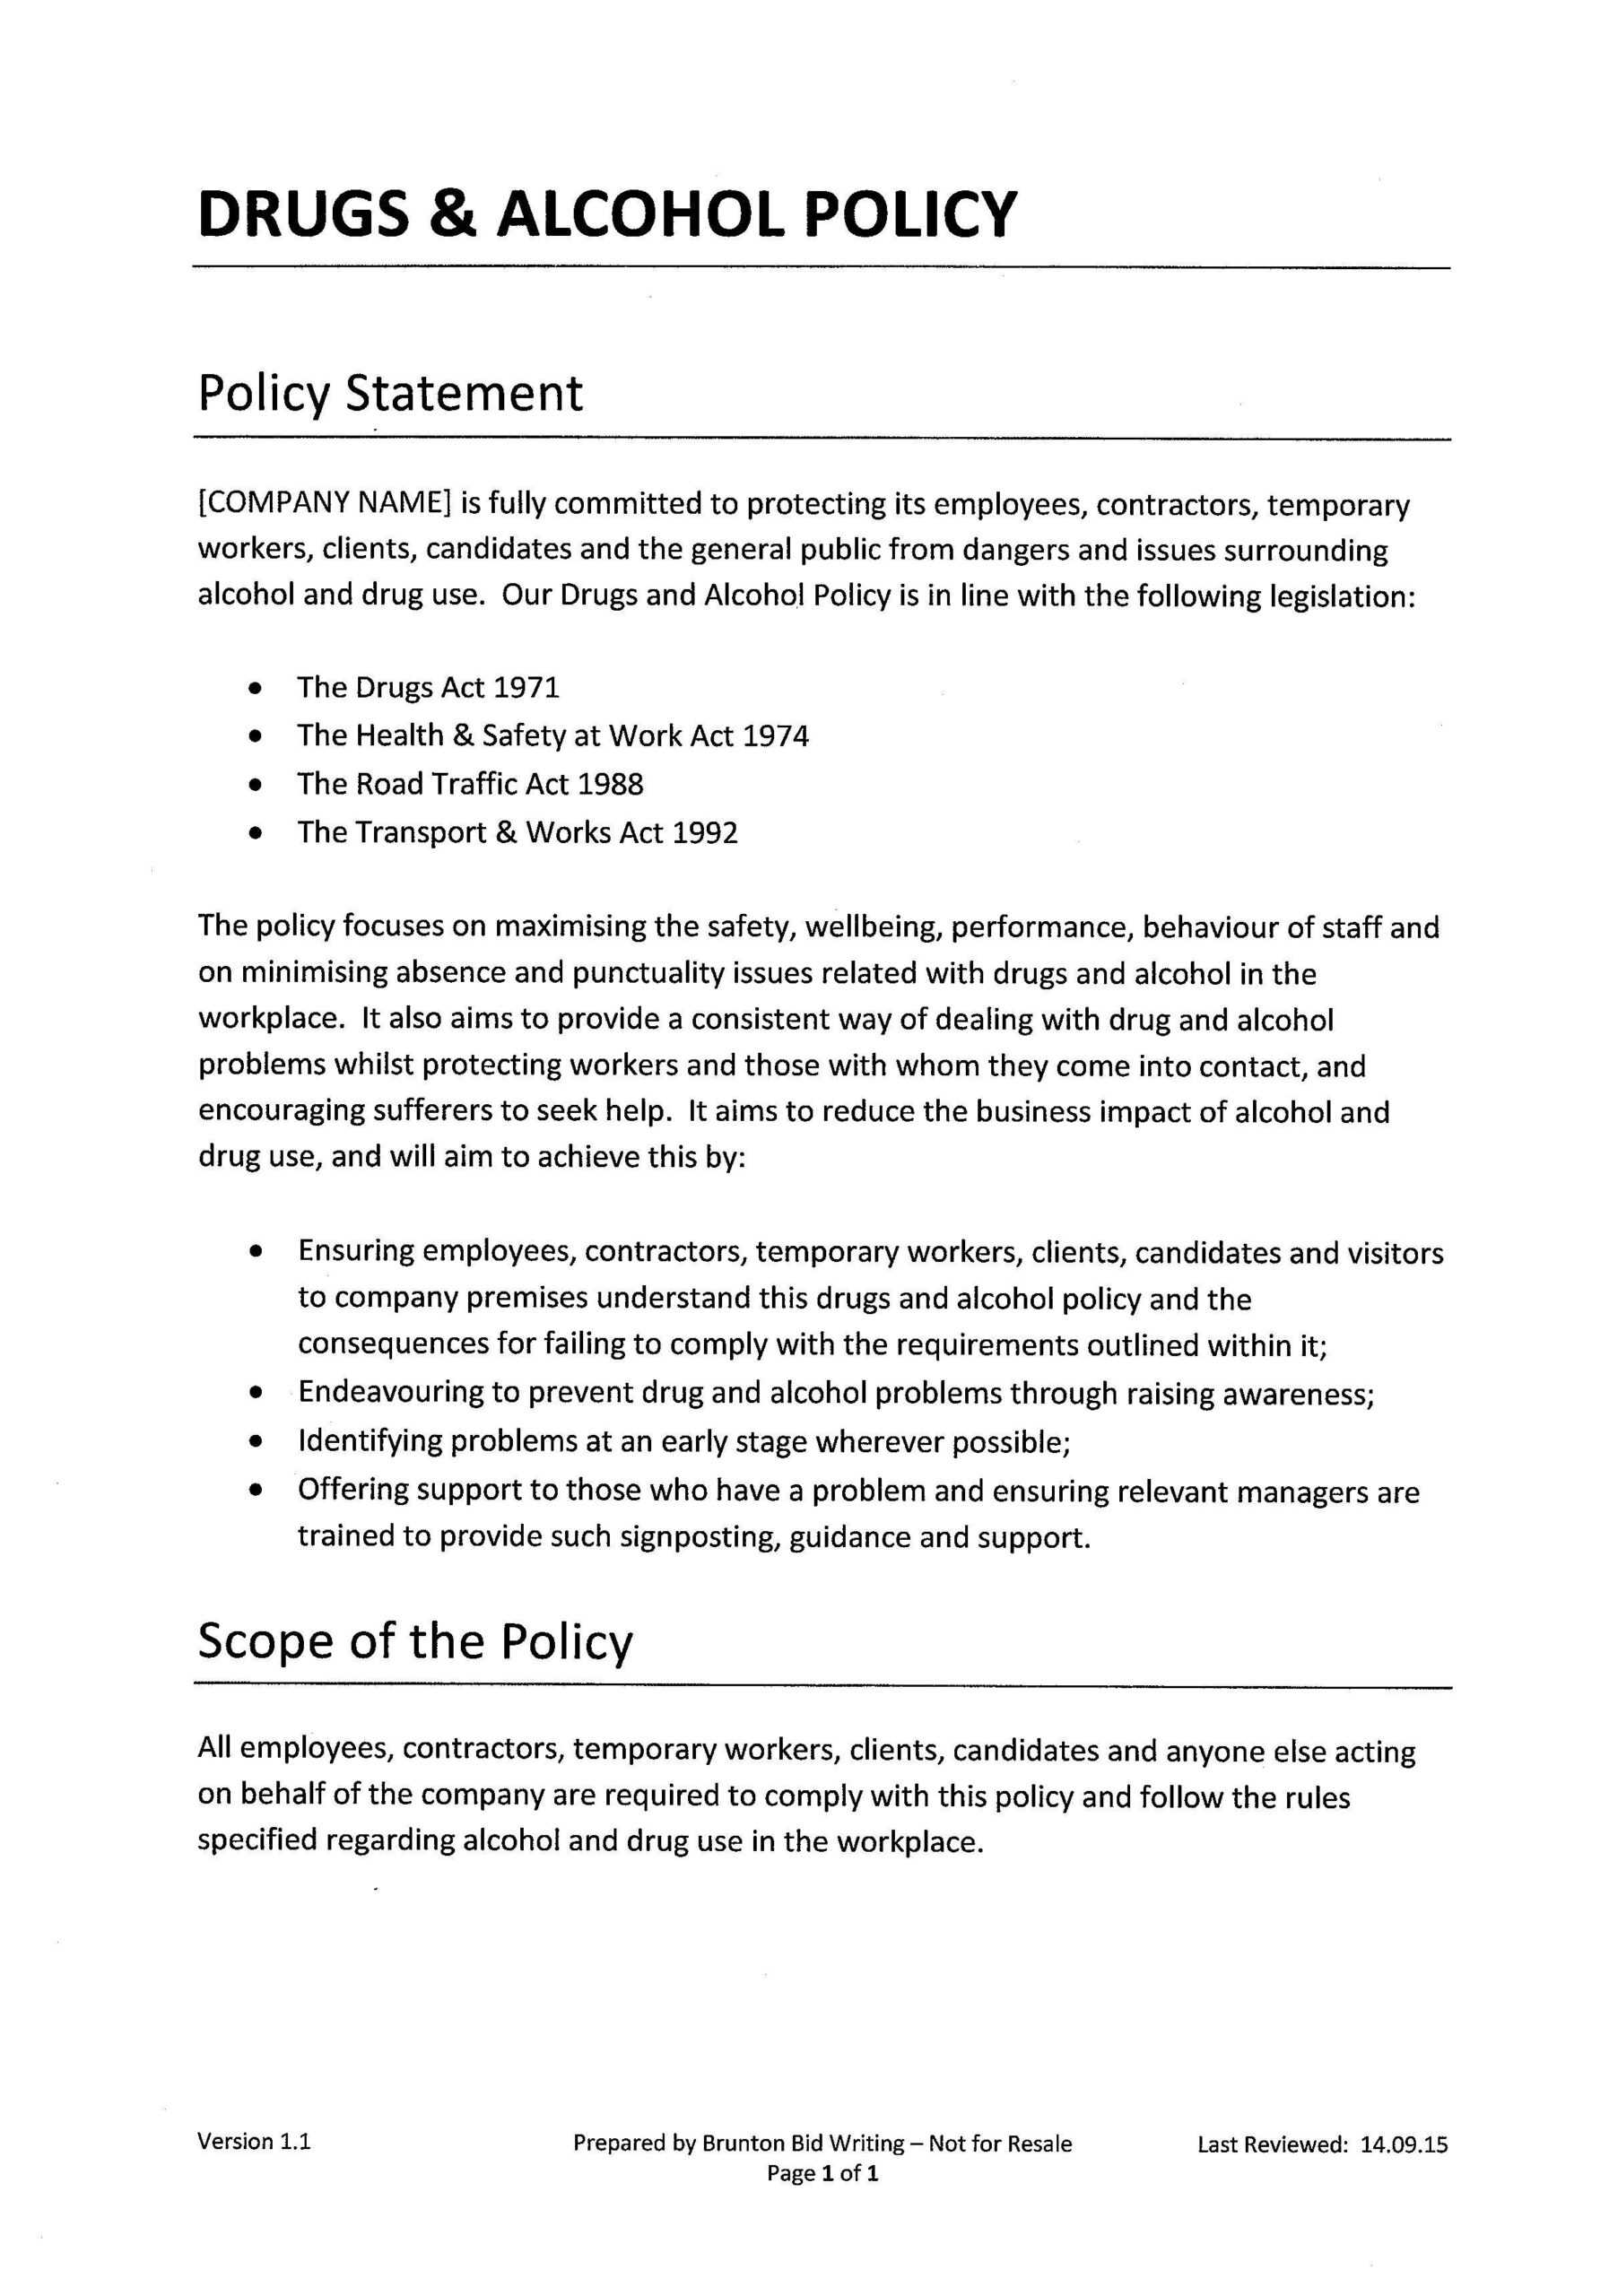 Drug Free Workplace Policy Template ] – Drug Free Workplace Inside Drug And Alcohol Policy Template